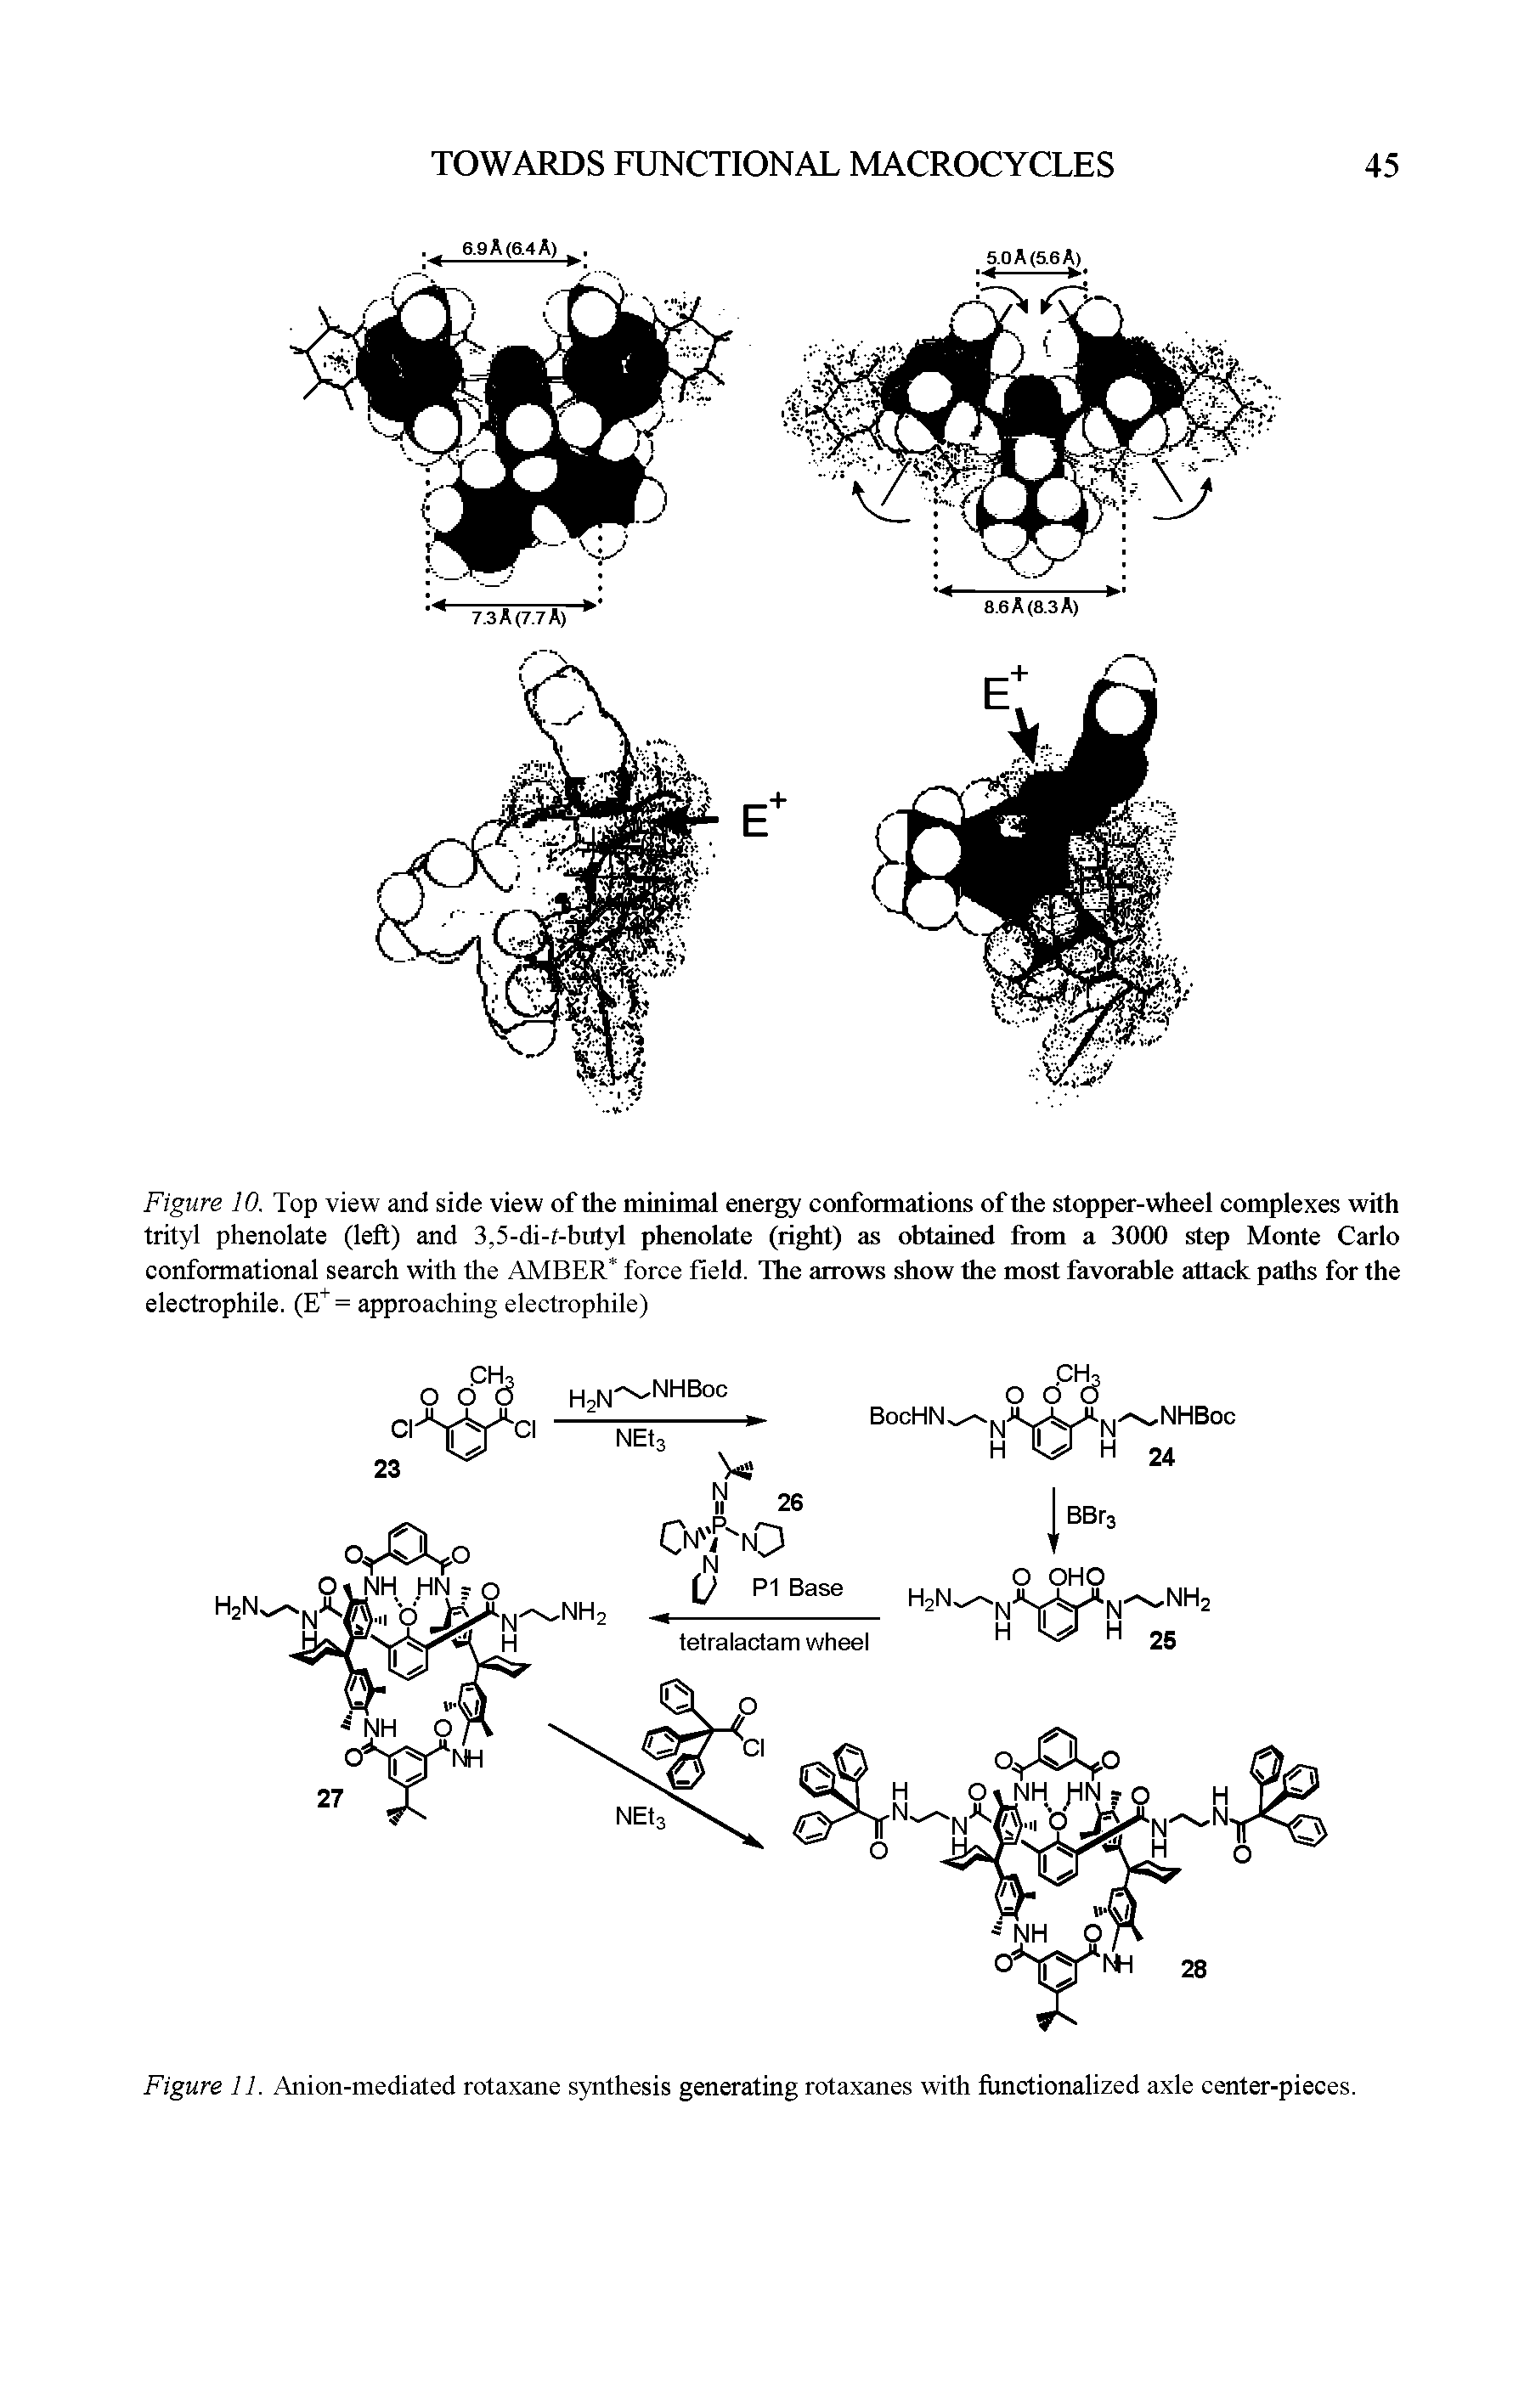 Figure 10. Top view and side view of the minimal energy conformations of the stopper-wheel complexes with trityl phenolate (left) and 3,5-di-f-butyl phenolate (right) as obtained from a 3000 step Monte Carlo conformational search with the AMBER force field. The arrows show the most favorable attack paths for the electrophile. (E+= approaching electrophile)...